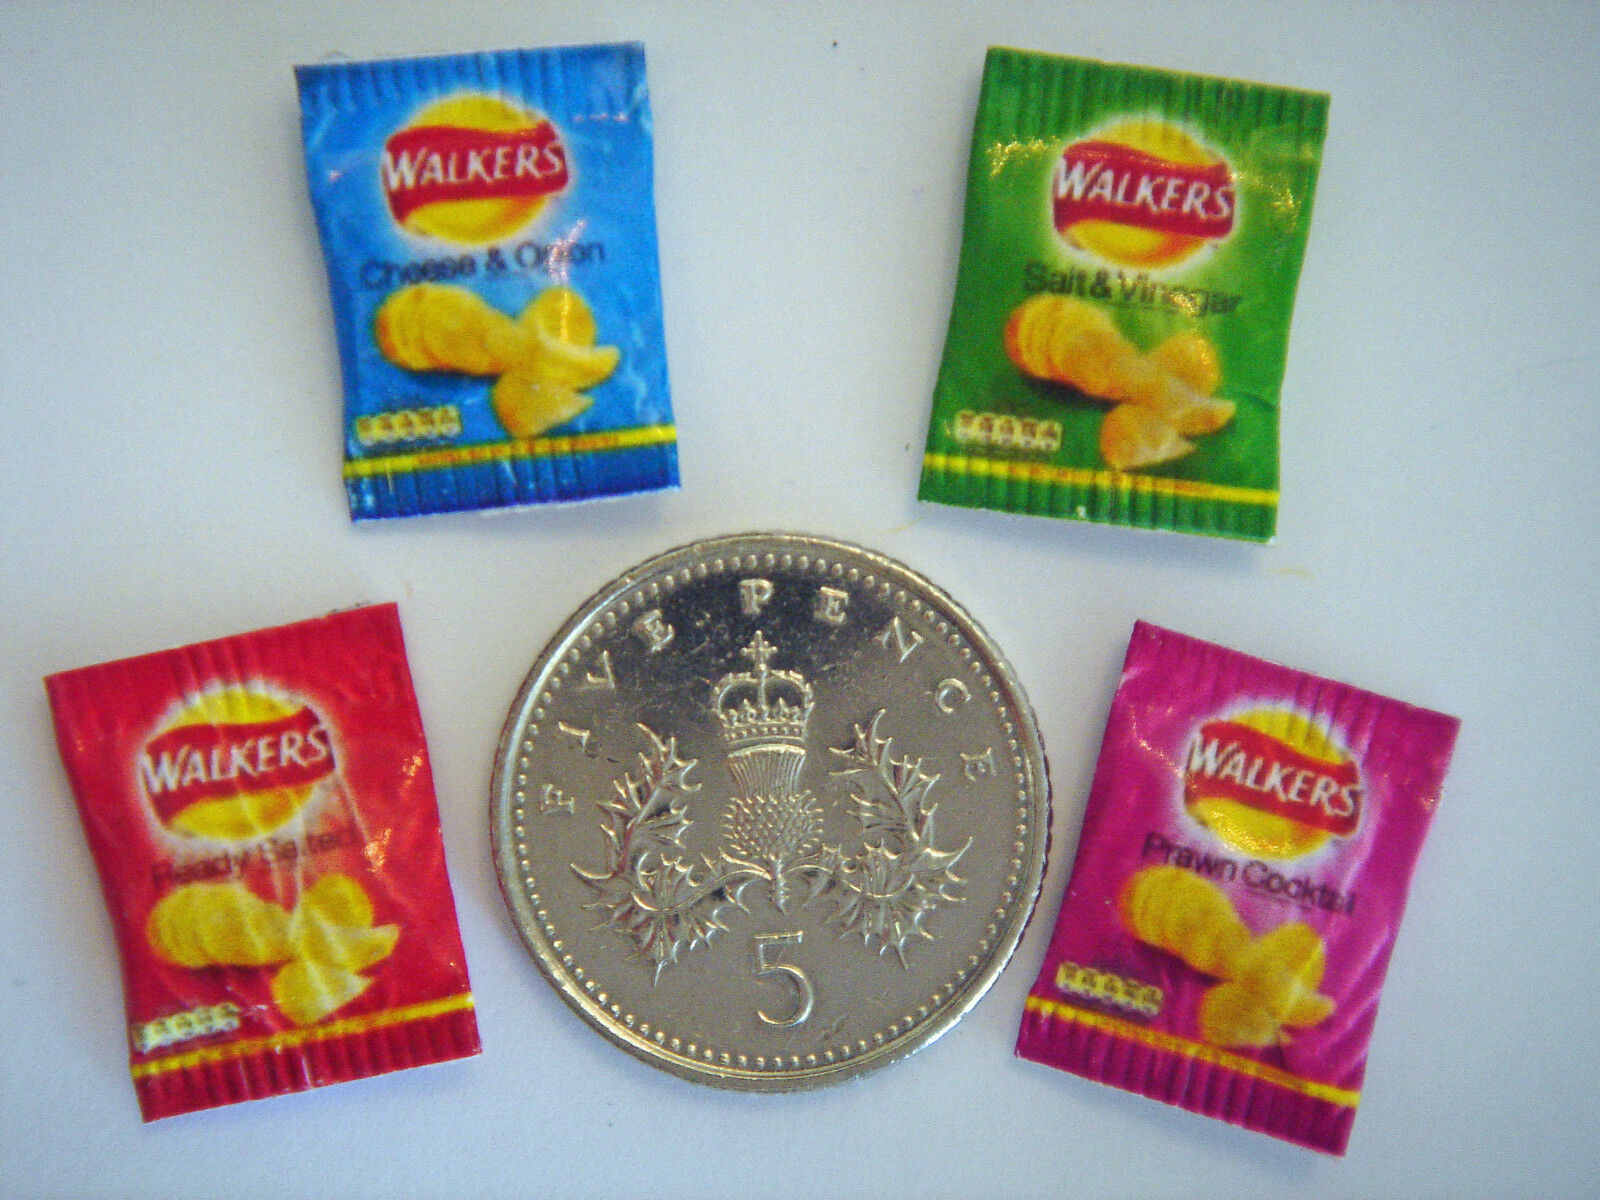 DOLLS HOUSE MINIATURE WALKERS CRISPS 4 PACKETS / FLAVOURS Handmade 1:12th Scale 